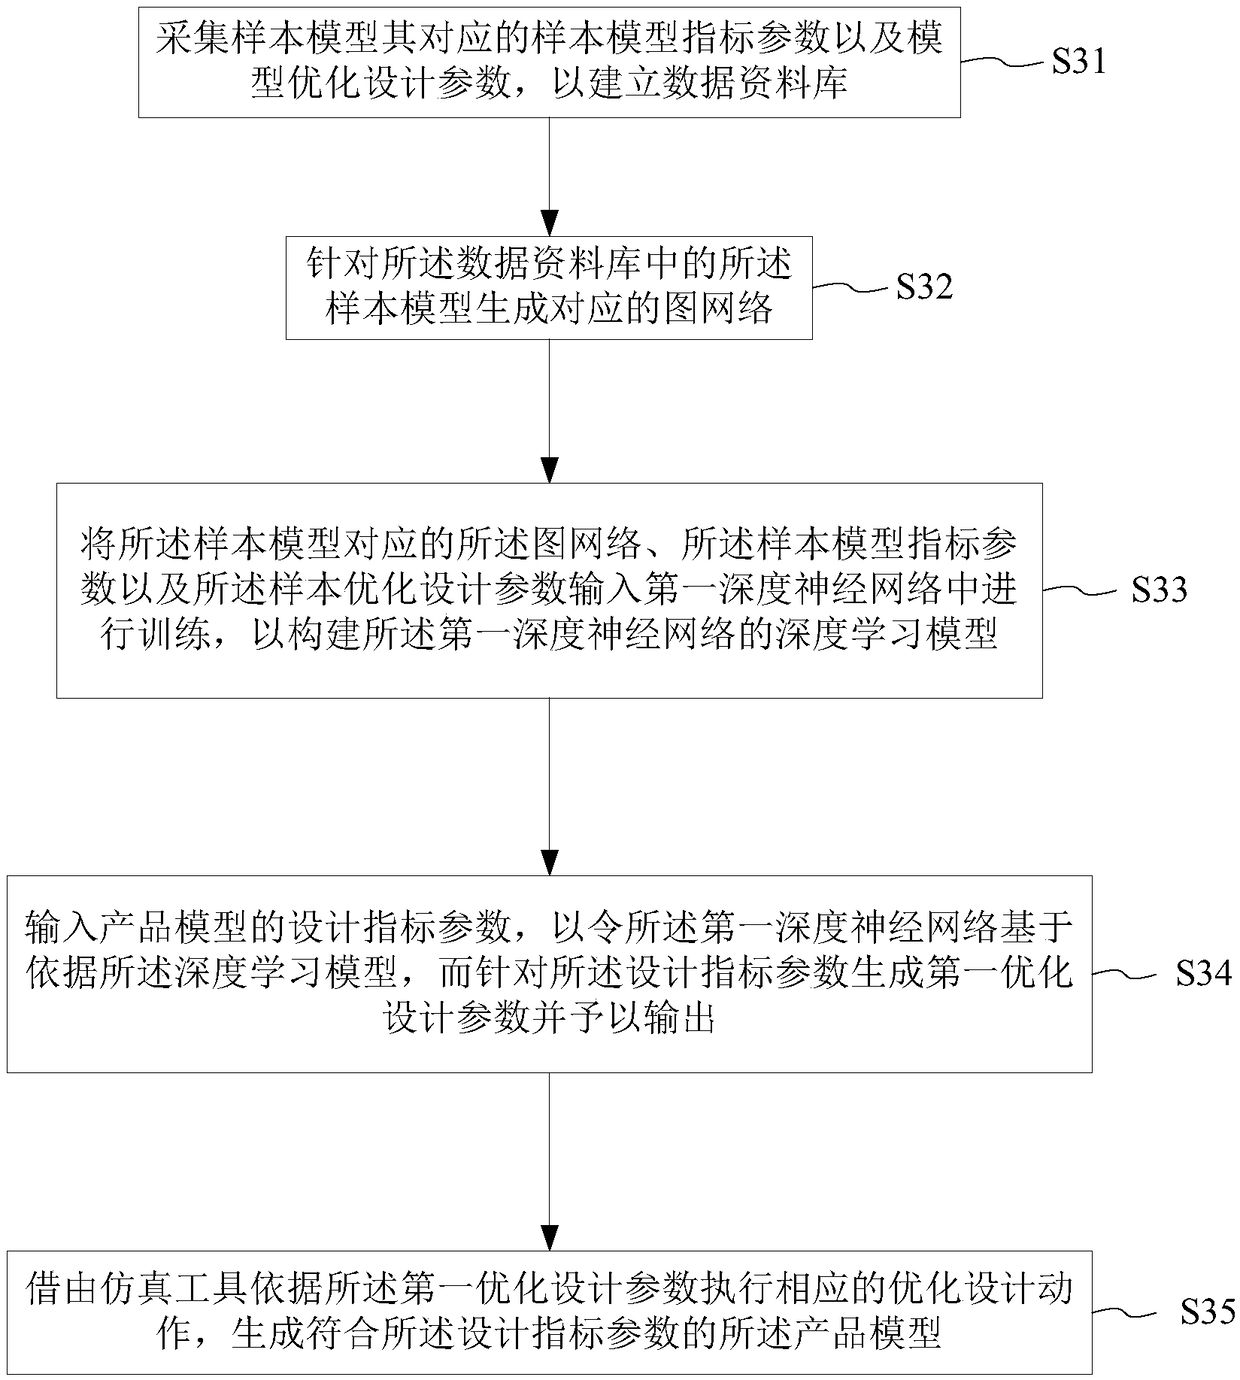 Product model design system and method based on graph network